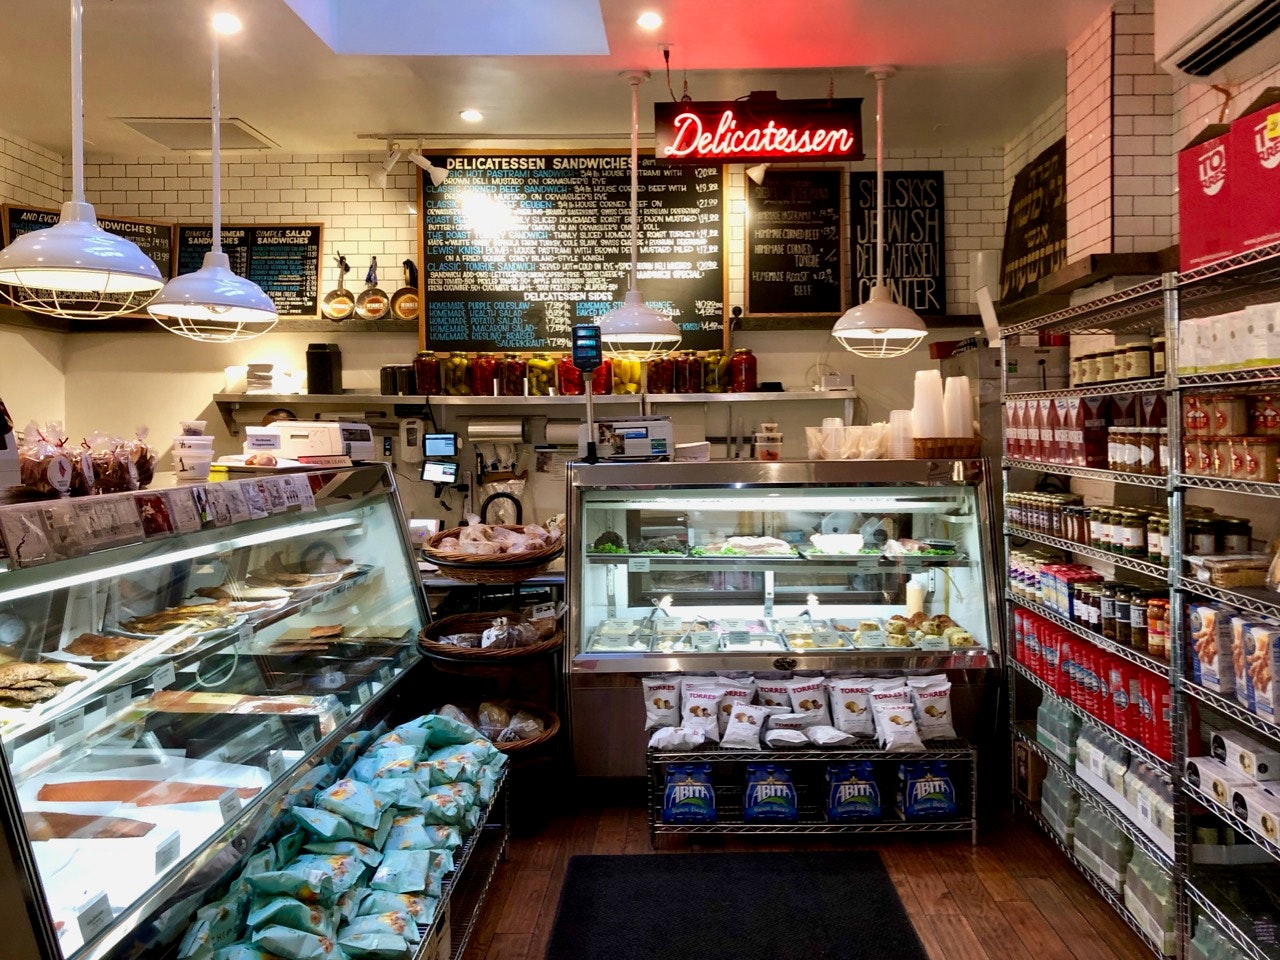 Shelsky's of Brooklyn is a classic Jewish deli and appetizing shop rolled into one